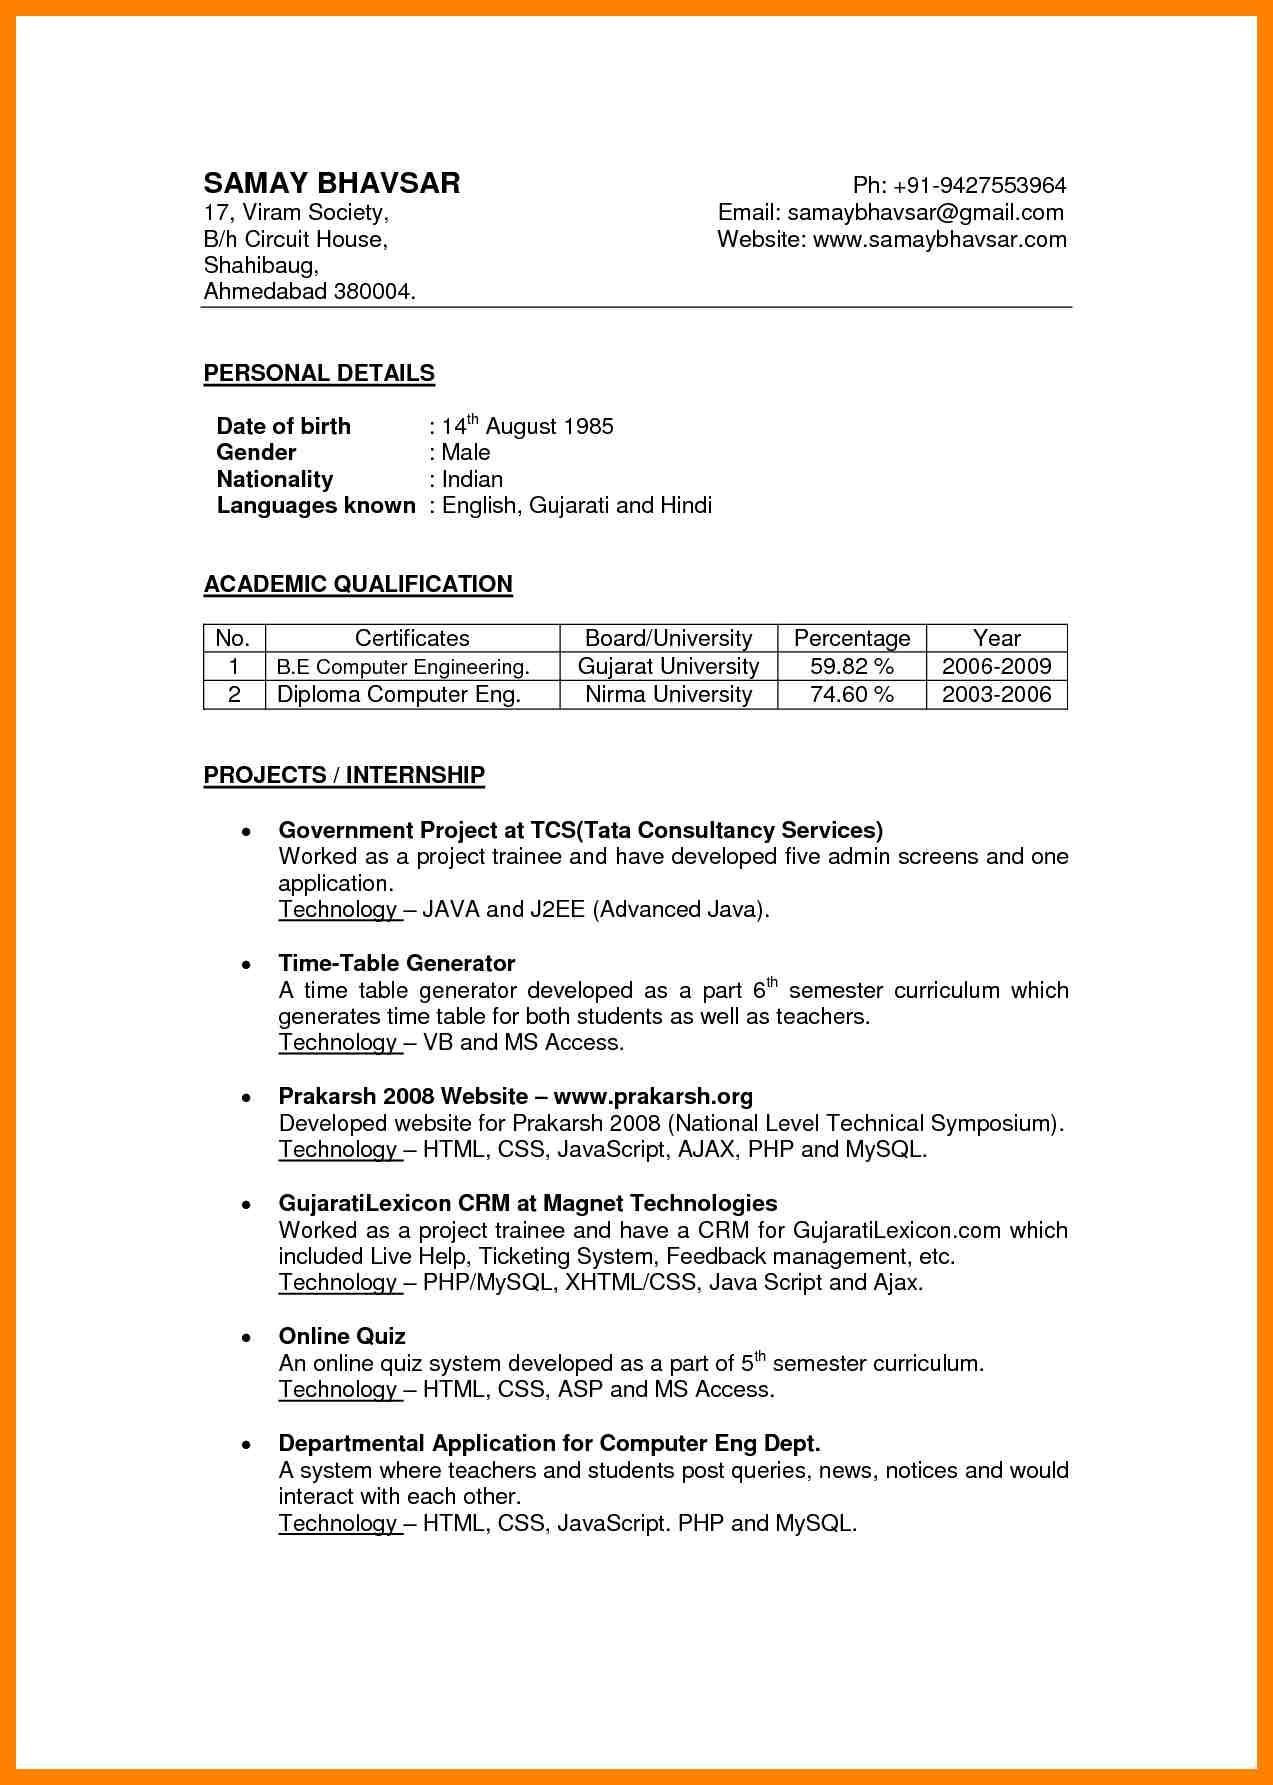 Resume Samples for College Students In India Resume format Gujarat – Resume format Resume format, Sample …